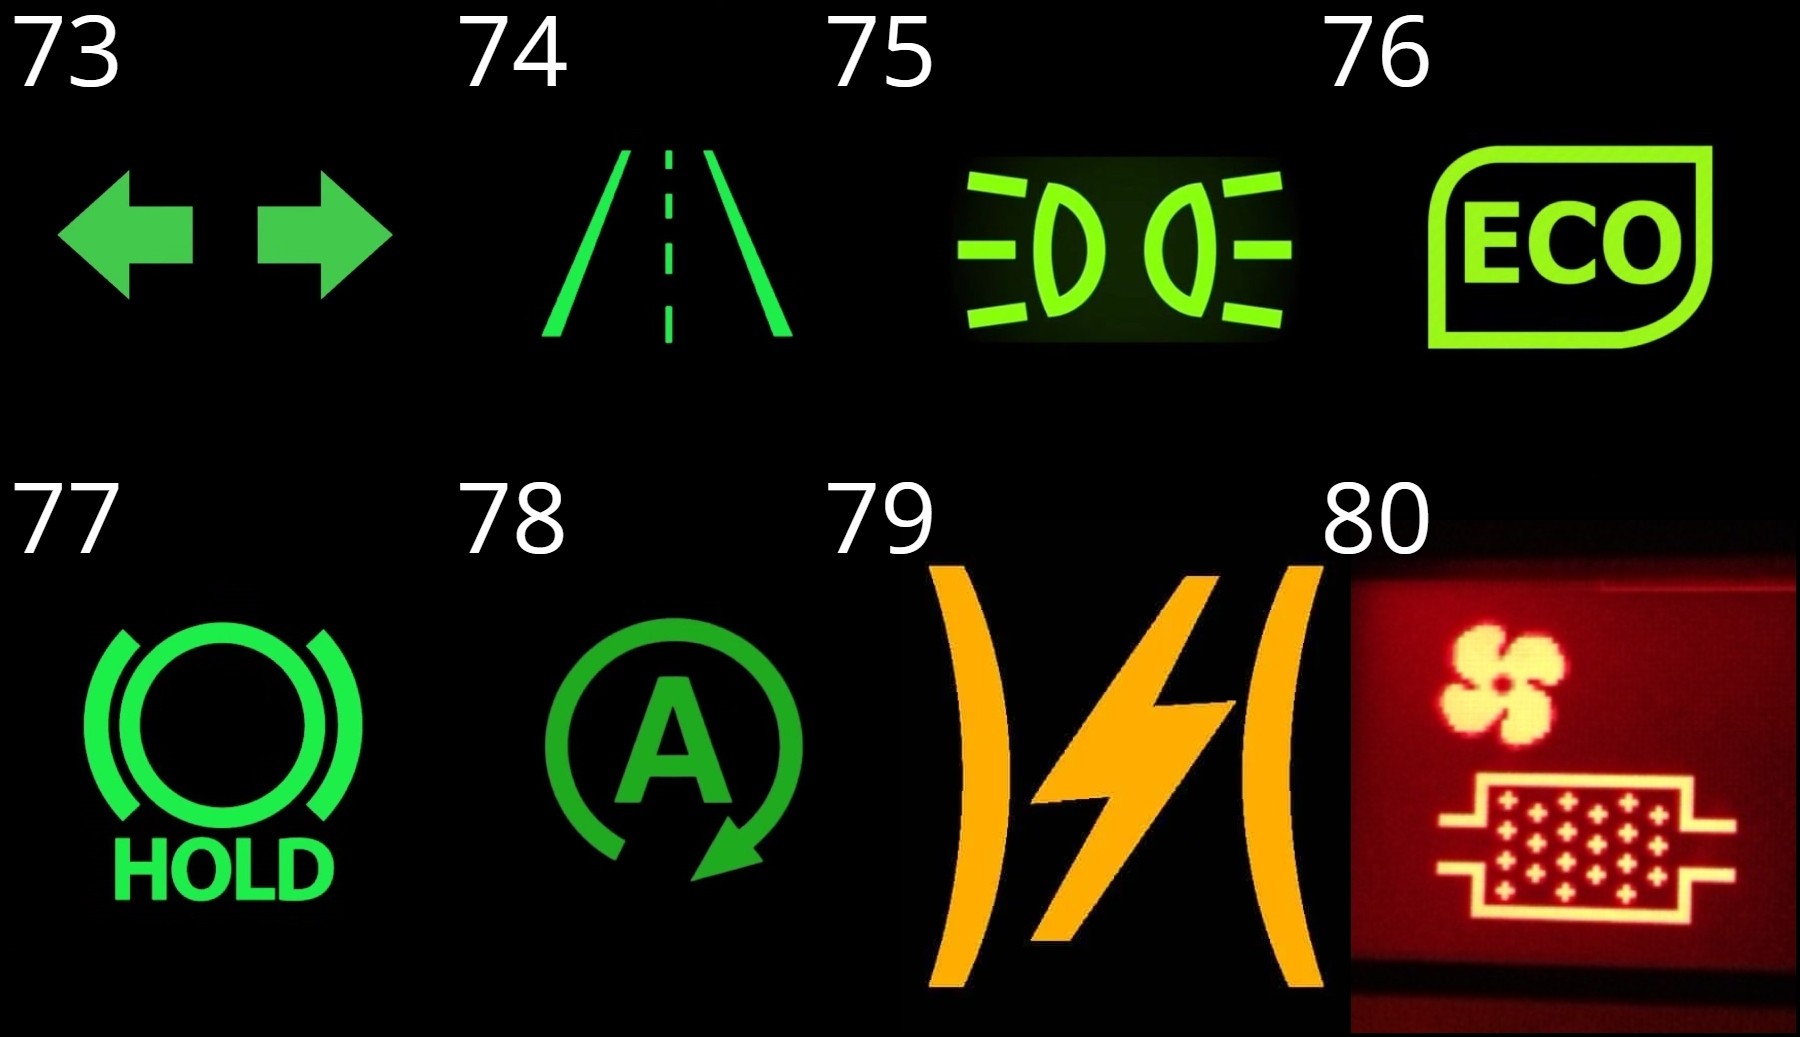 What these common car warning lights are trying to tell you